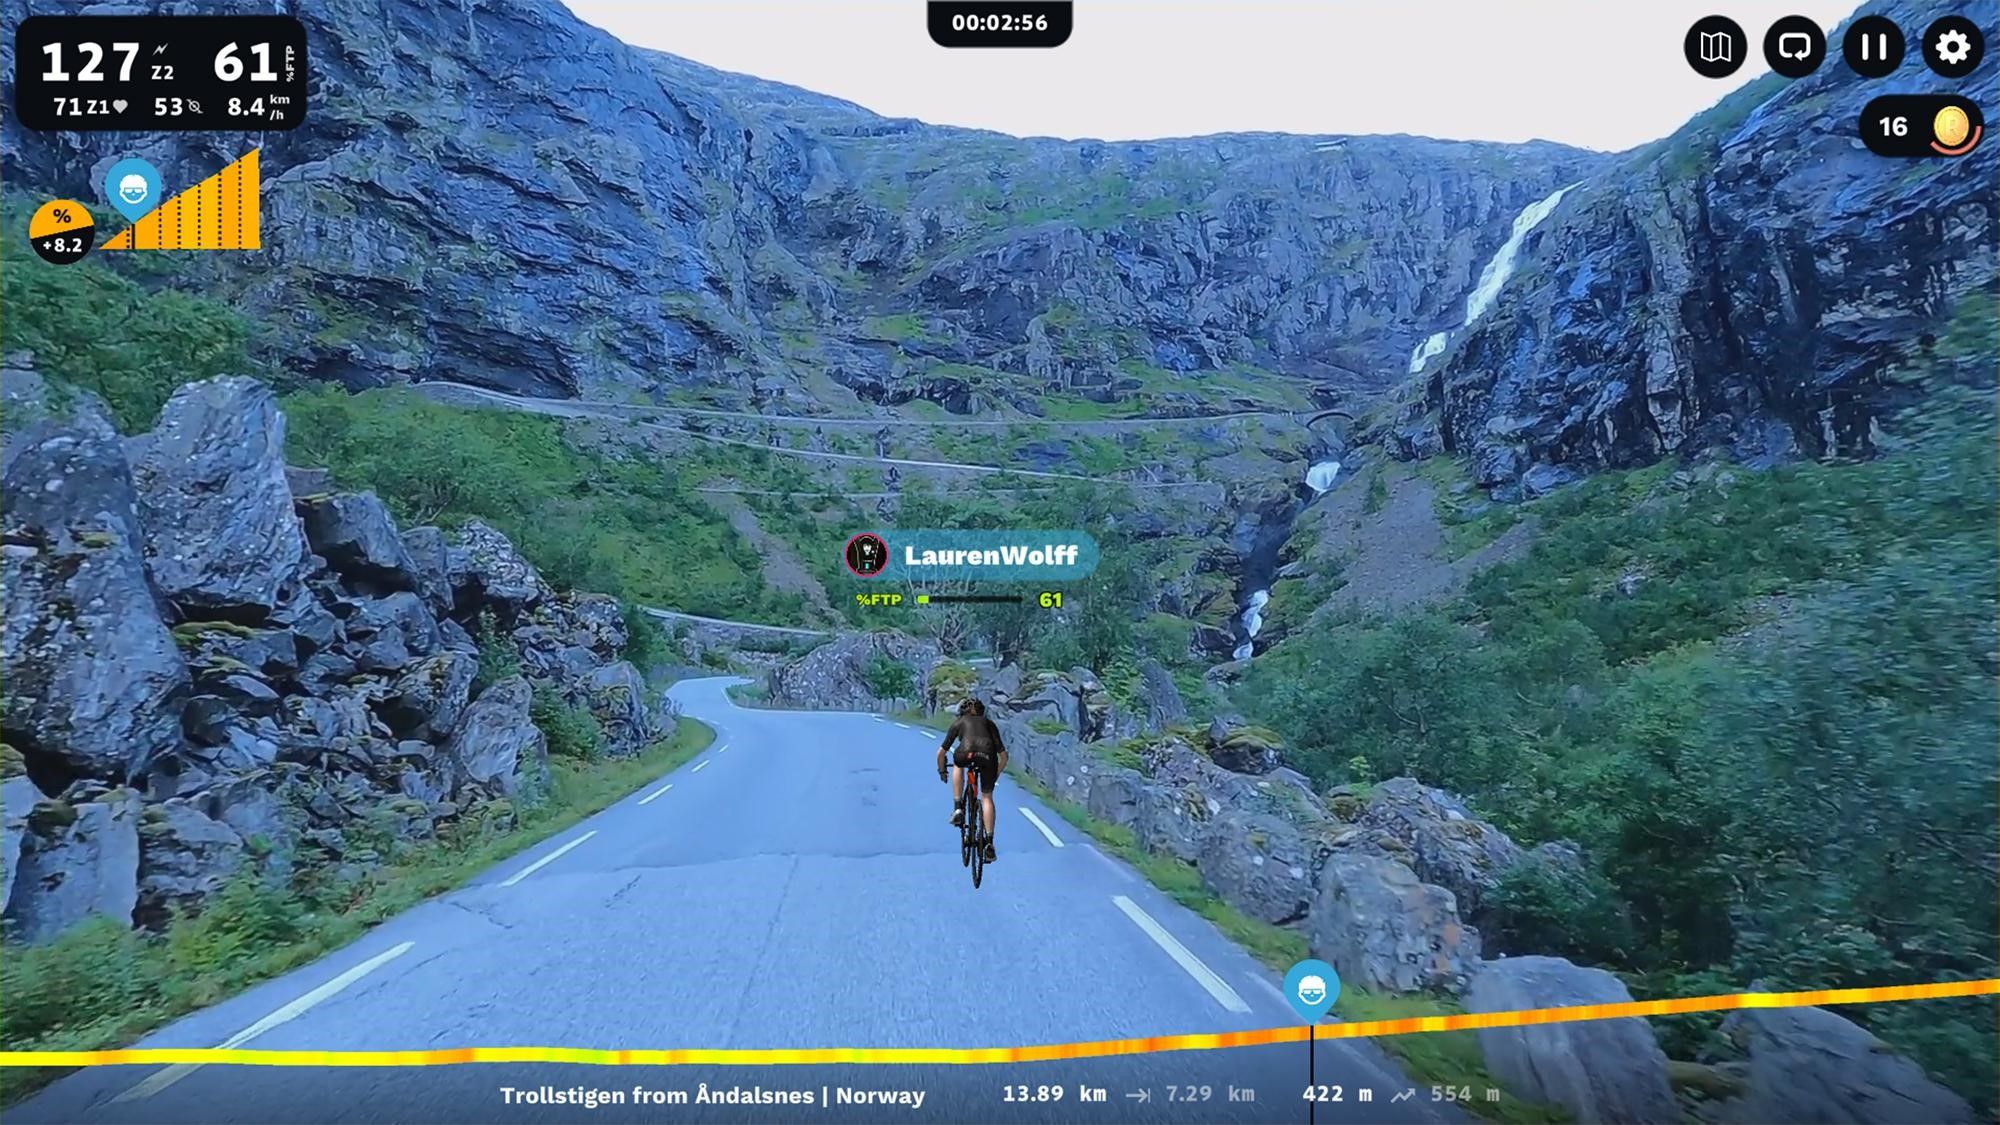 Climb up the iconic and mythical engineering masterpiece on Trollstigen